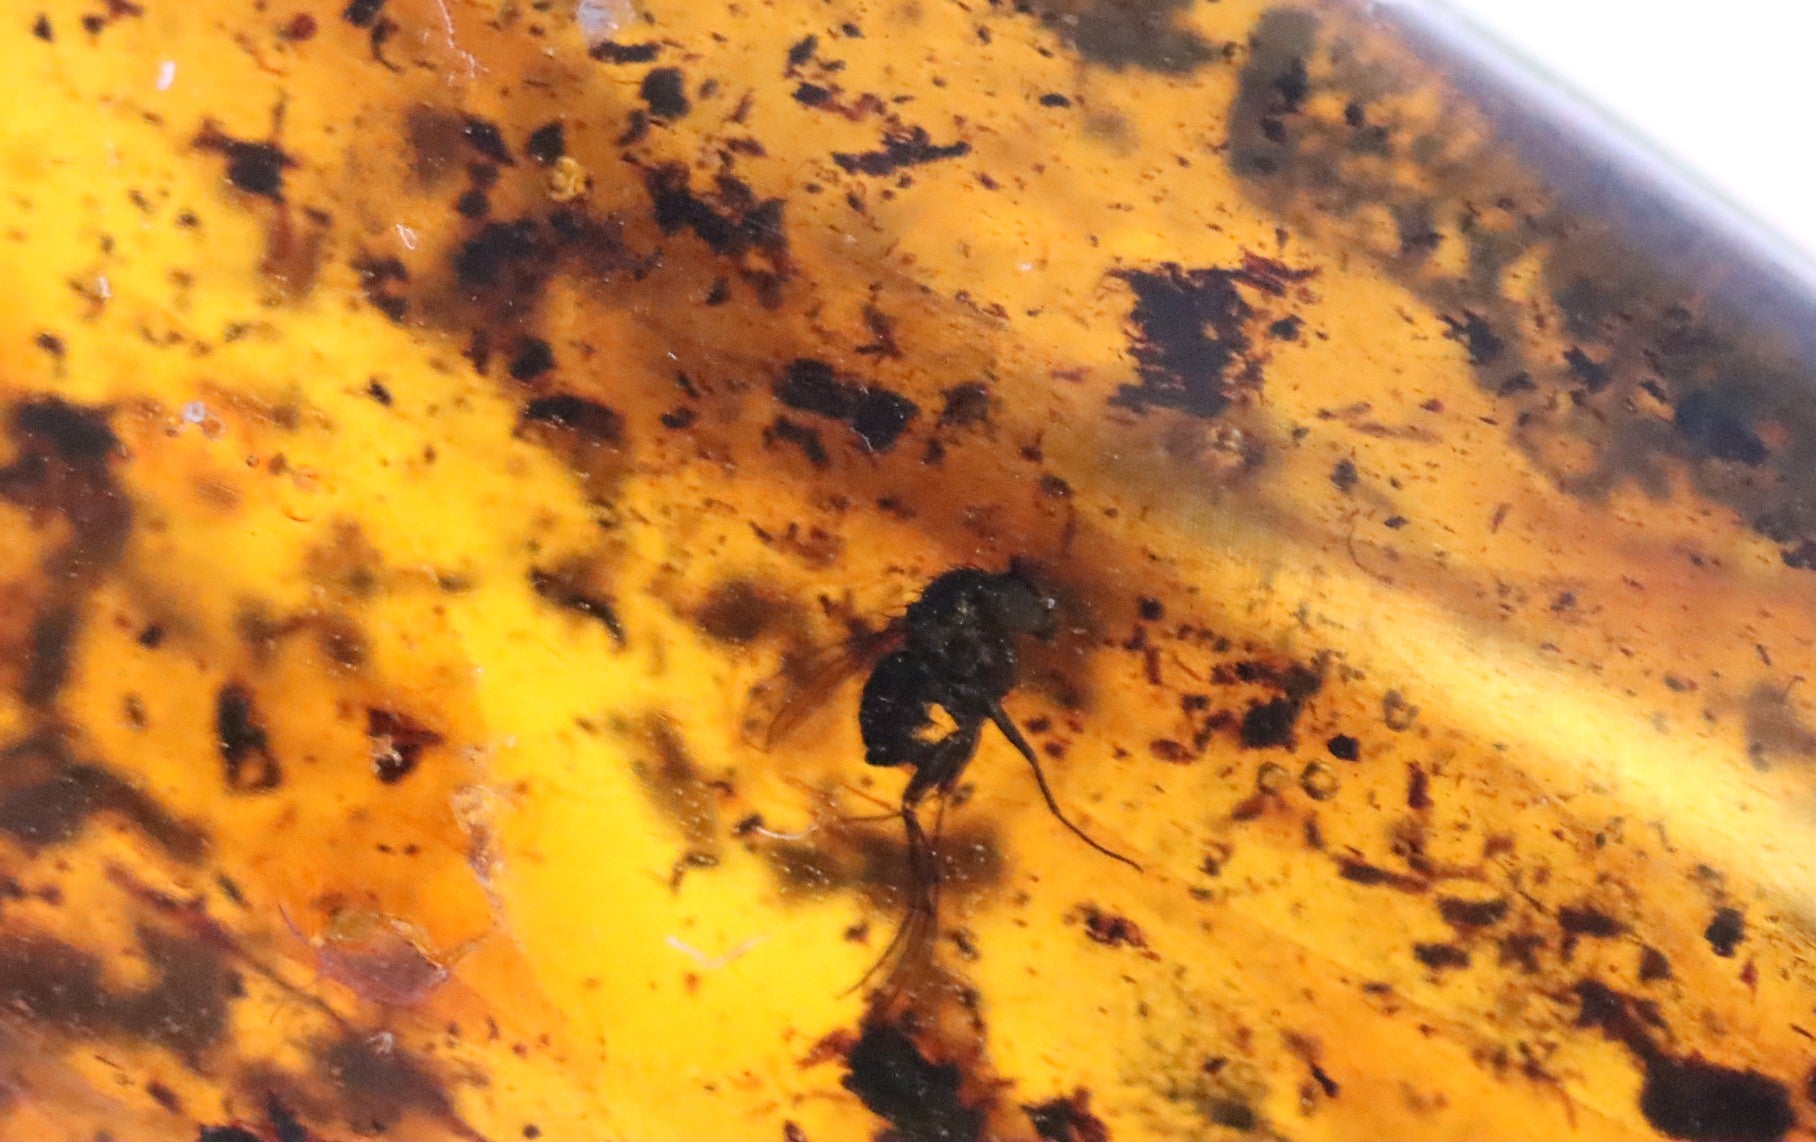 4 X Insects in Amber 40 million year old Baltic Amber Inclusion